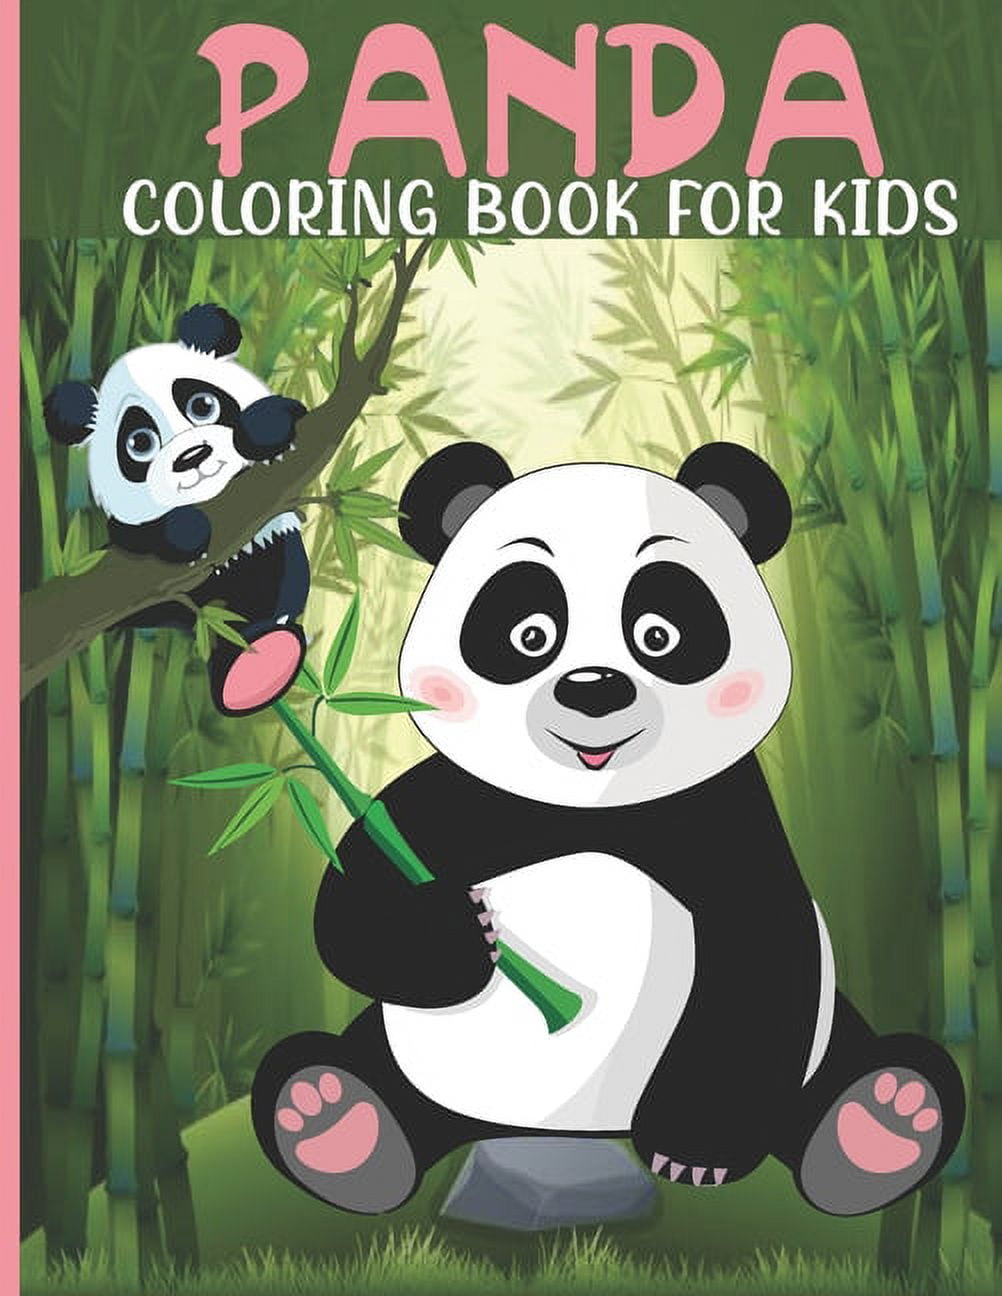 Panda Coloring Book For Kids Ages 4-8-12: Stress Relief & Relaxation for  Kid - Cute & Beautiful Bear - Positive Animal - Perfect Birthday Present  for